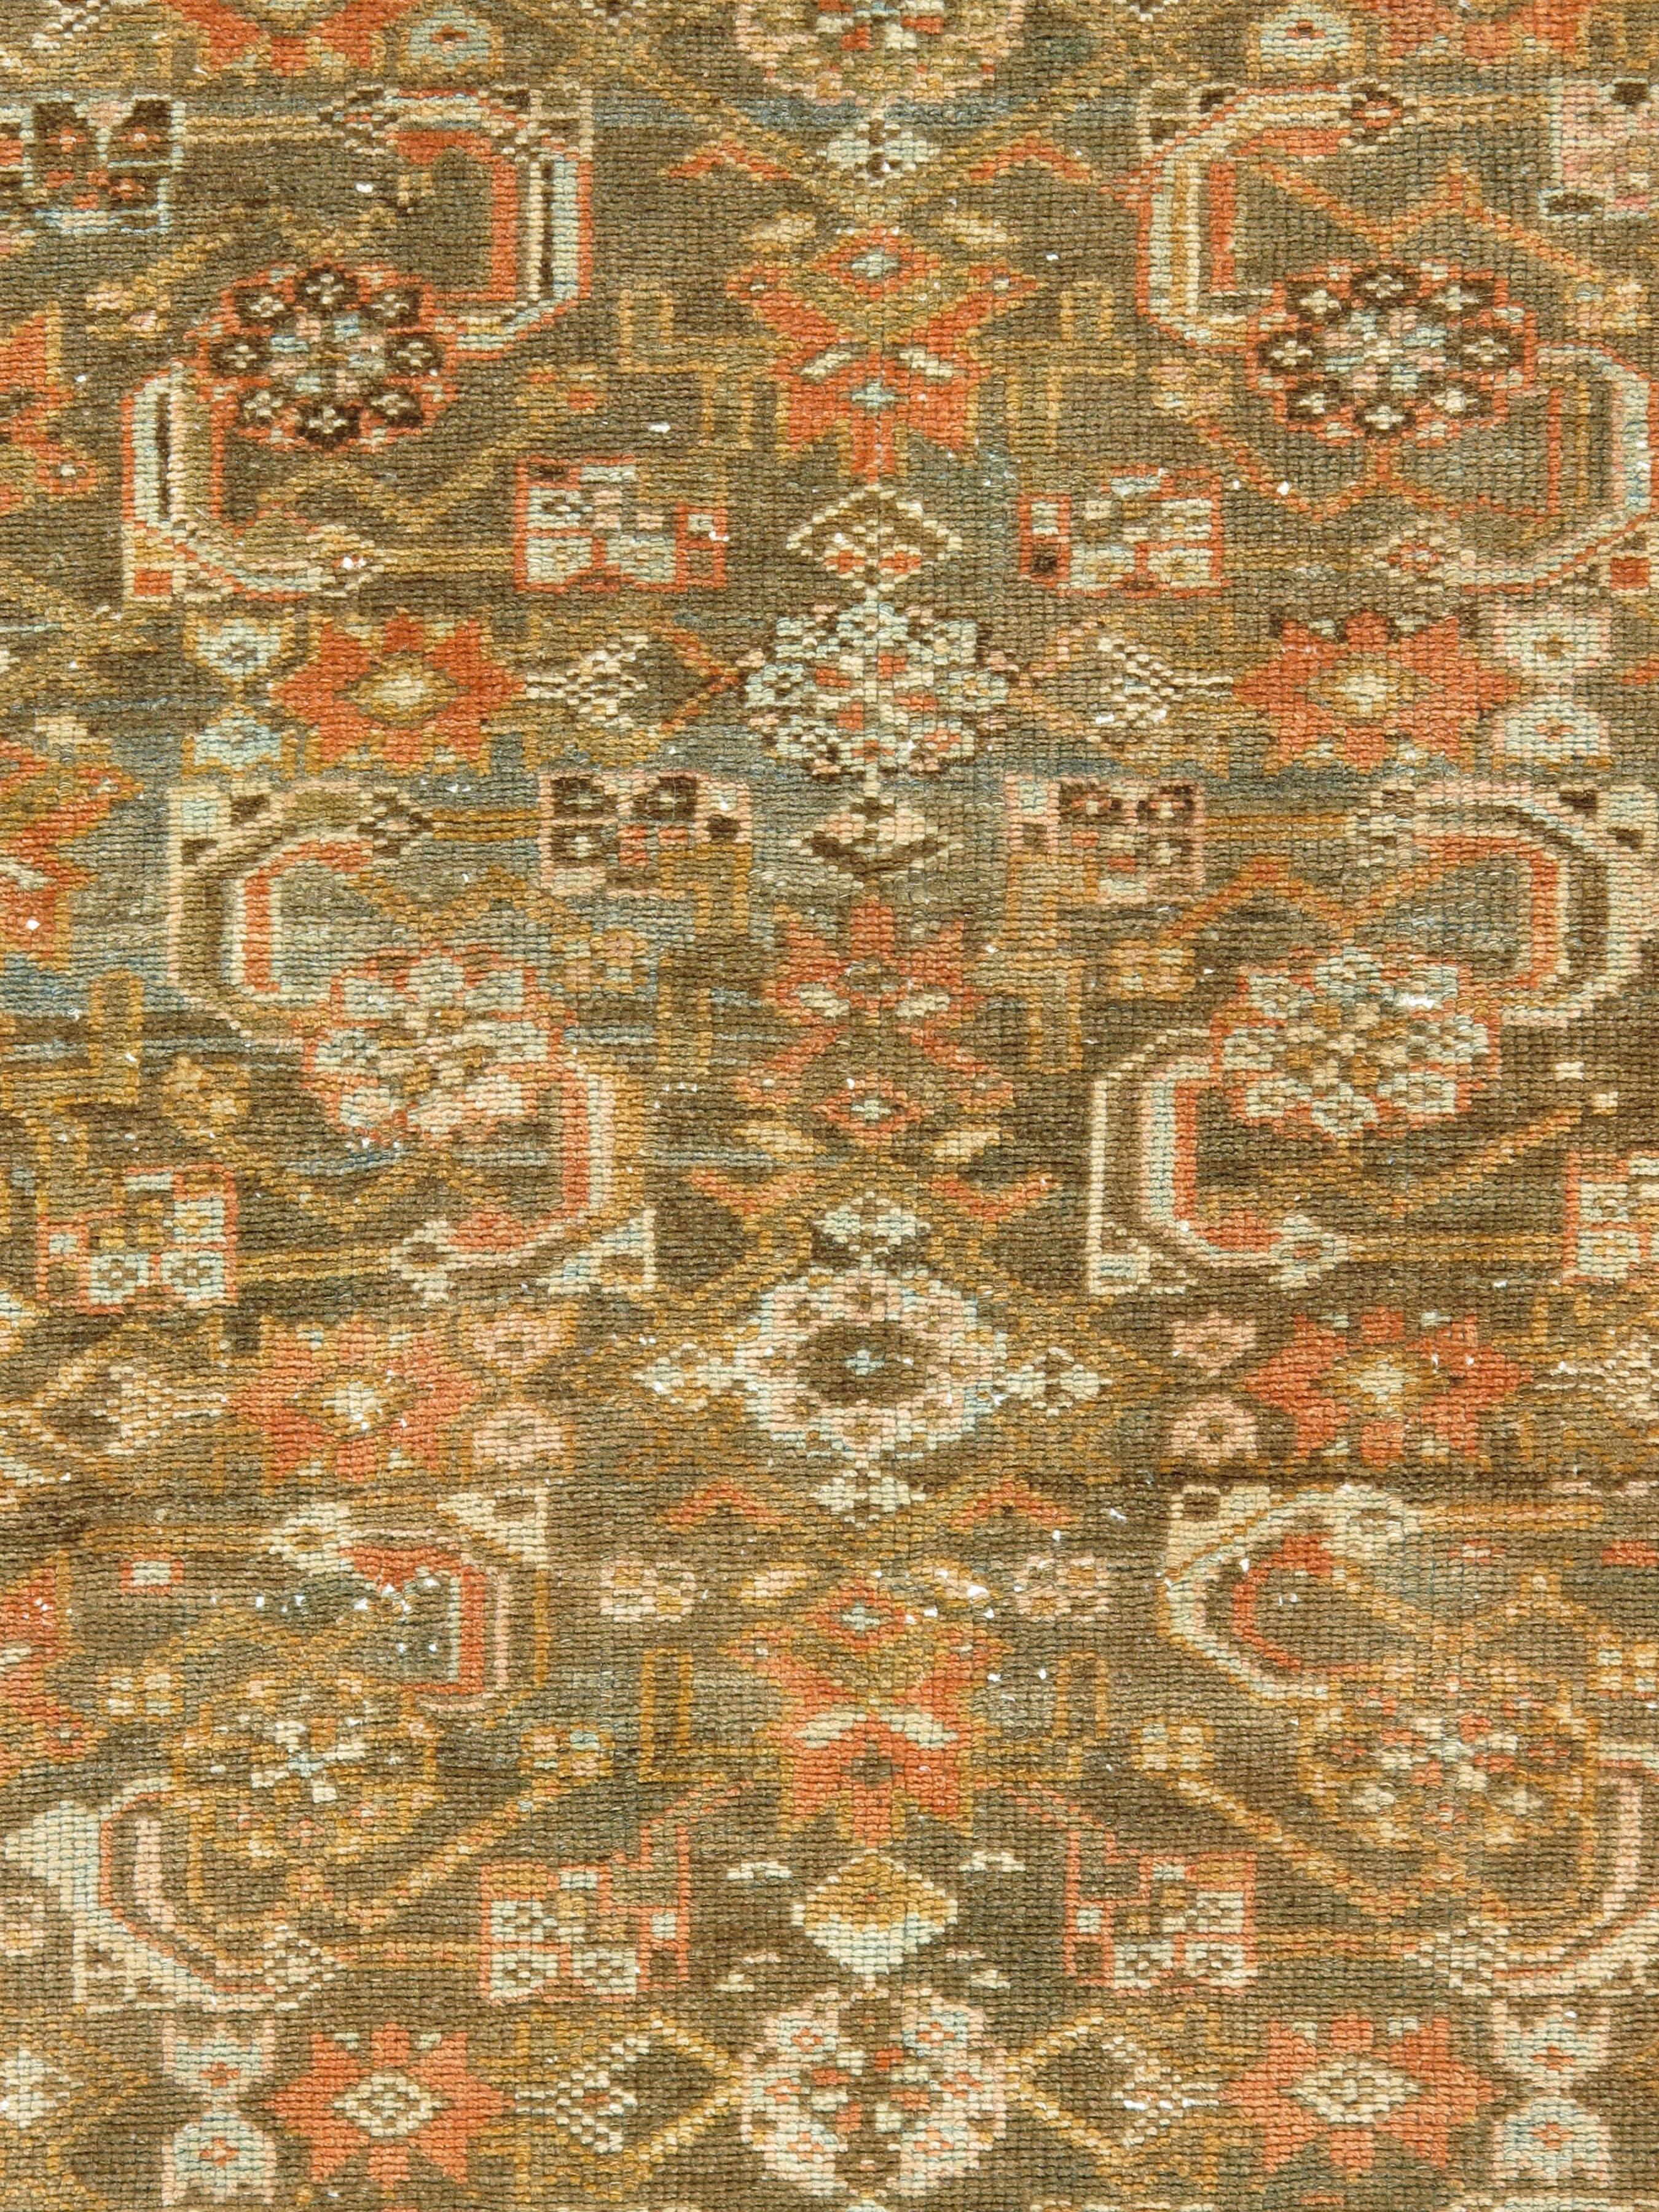 Antique Persian burnt orange Malayer rug, 3'3 x 4'9. Lovely colors of taupe/ burnt orange/ soft blues. Antique rugs from Malayer, east of Hamadan, could be considered top quality Hamadan’s and they hare similar structural aspects. Although seemingly